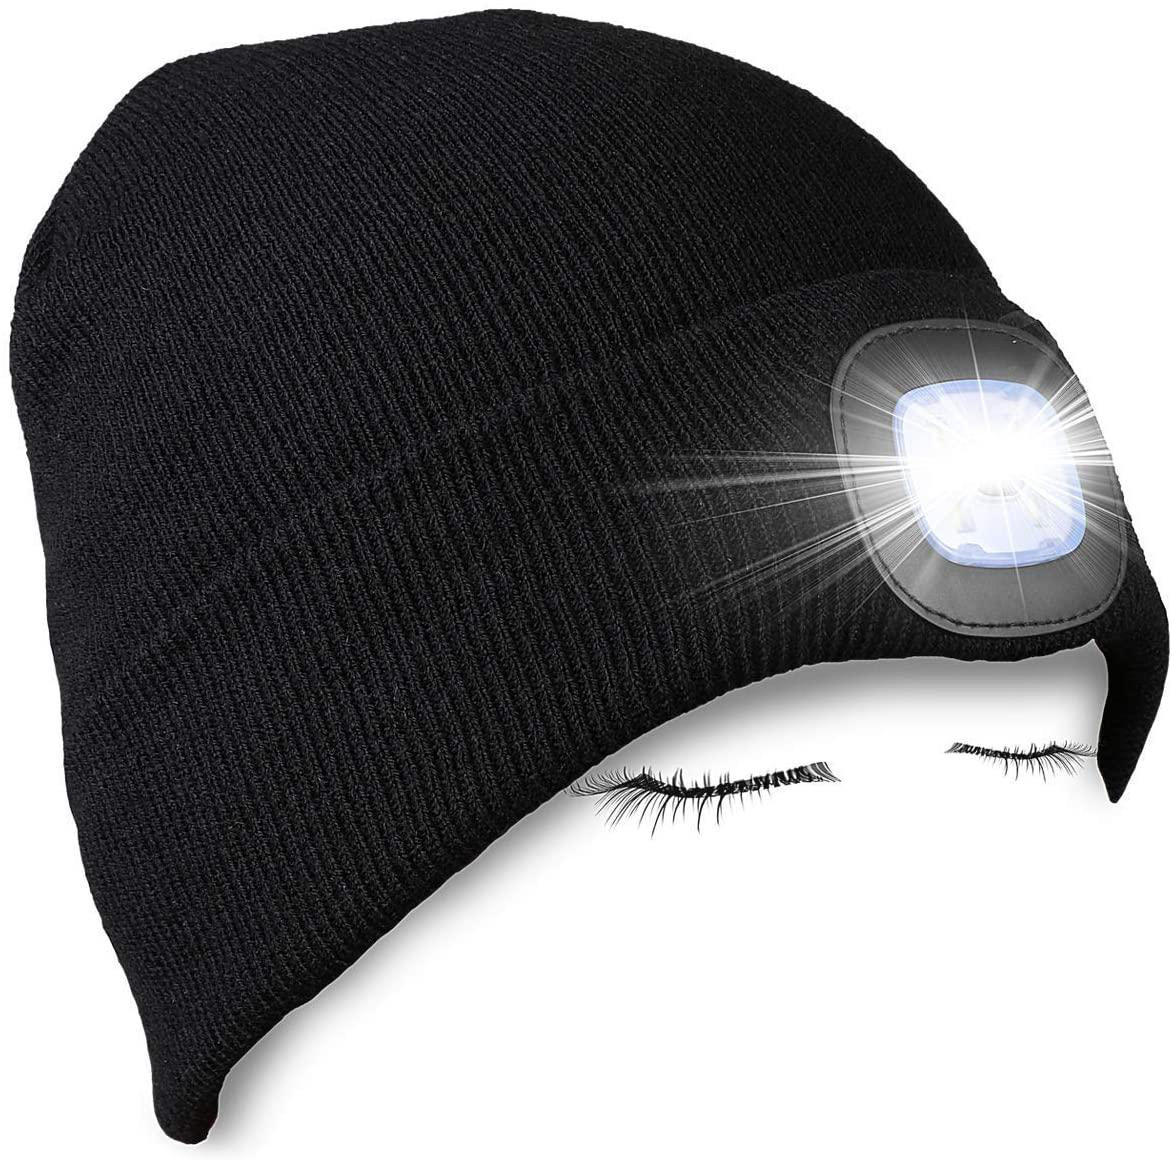 Unisex LED Beanie Hat With USB Rechargeable Battery High Powered Head Lamp Light 